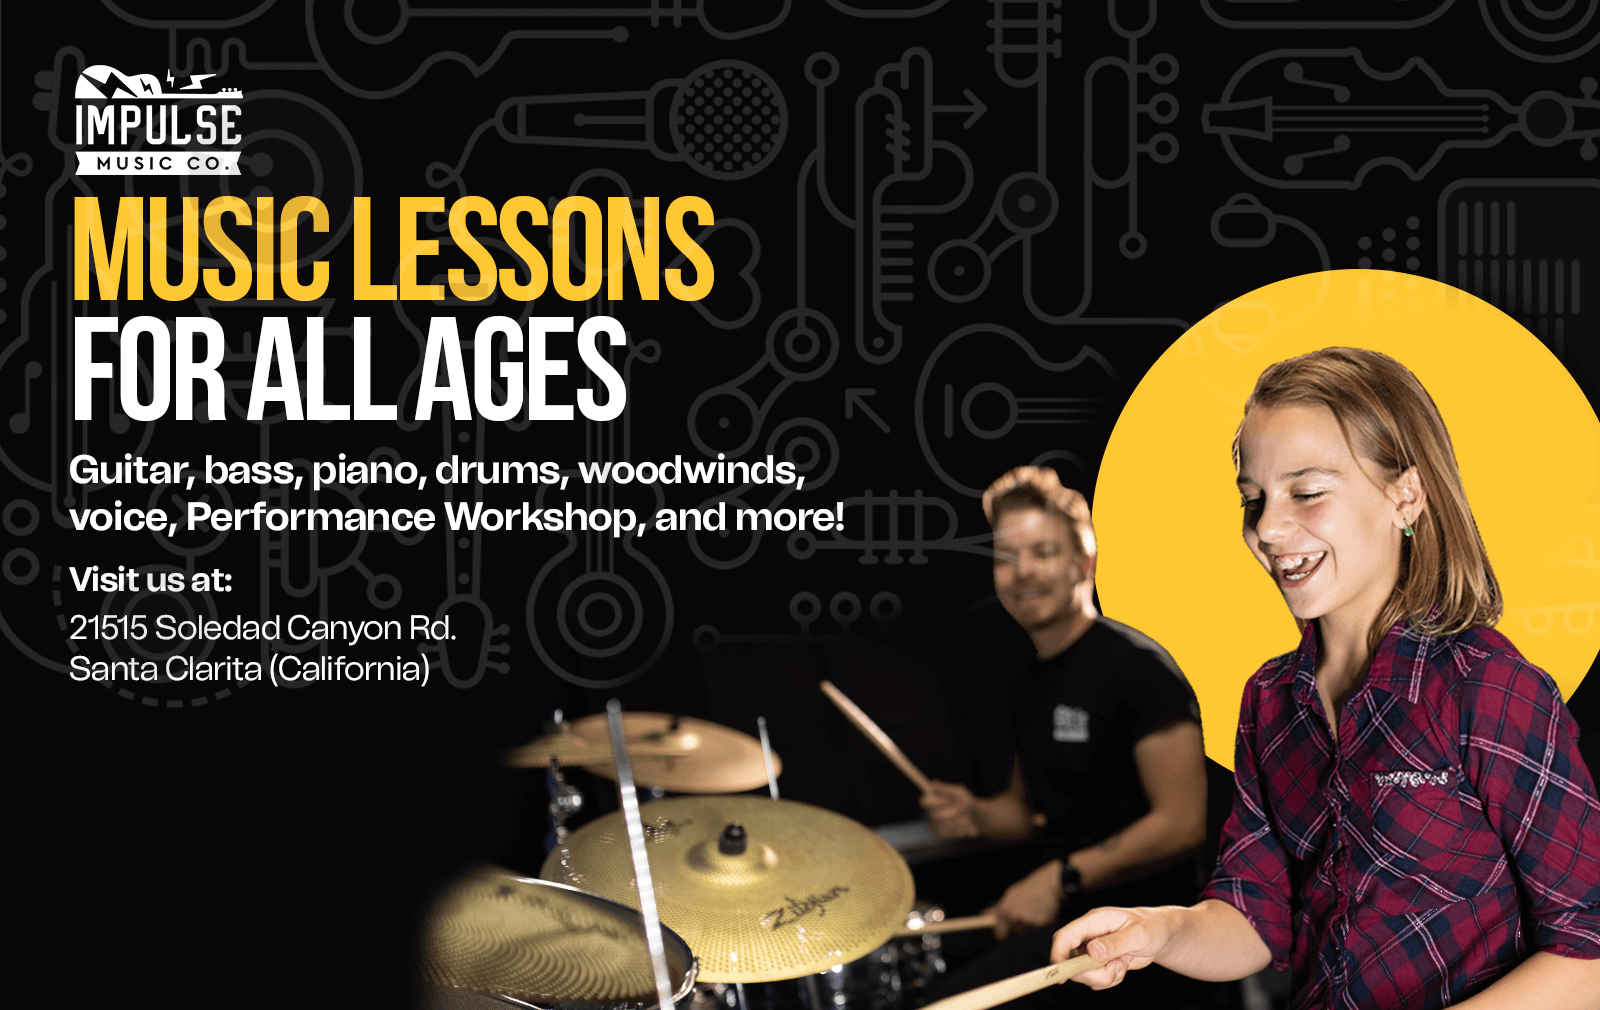 Impulse Music Co. Music Lessons For All Ages